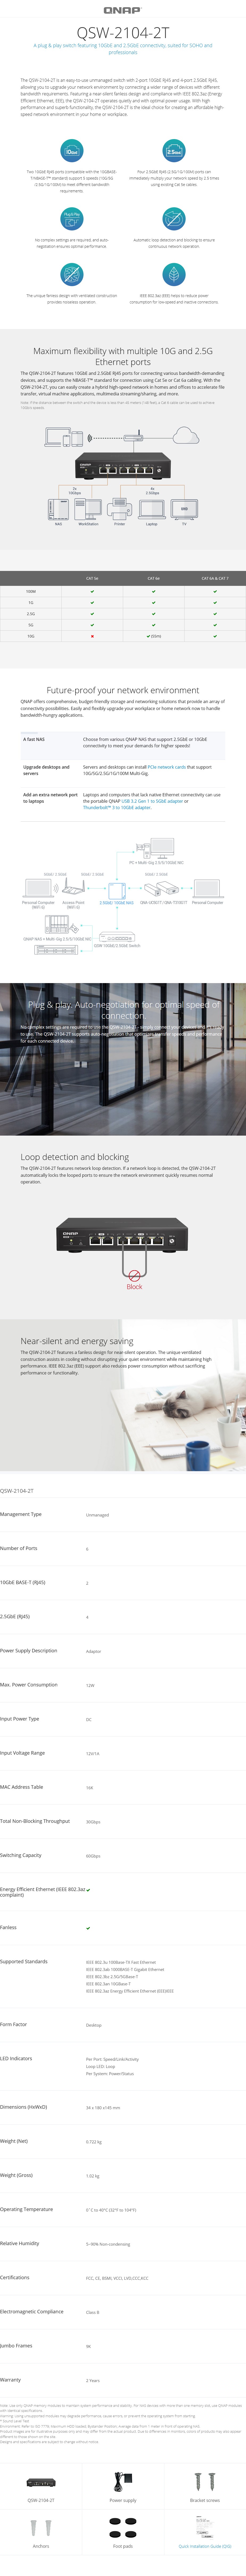 A large marketing image providing additional information about the product QNAP QSW-2104-2T 10GbE/2.5GbE 6-Port Network Switch - Additional alt info not provided